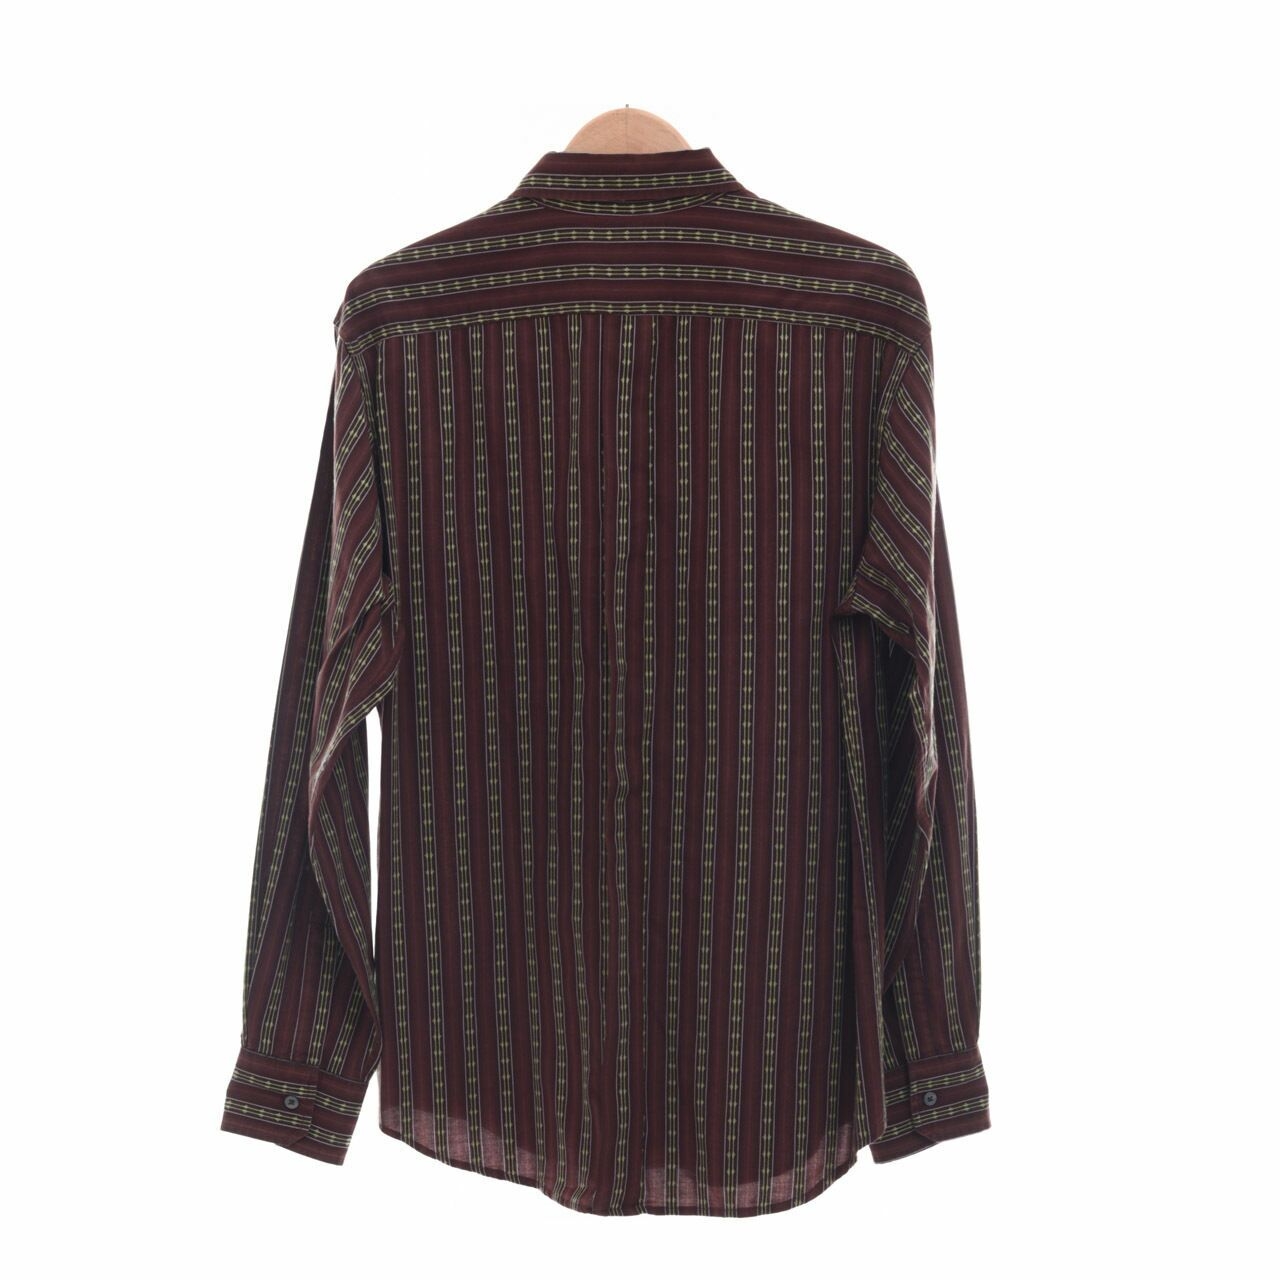 Paul Smith Brown Patterned Shirt